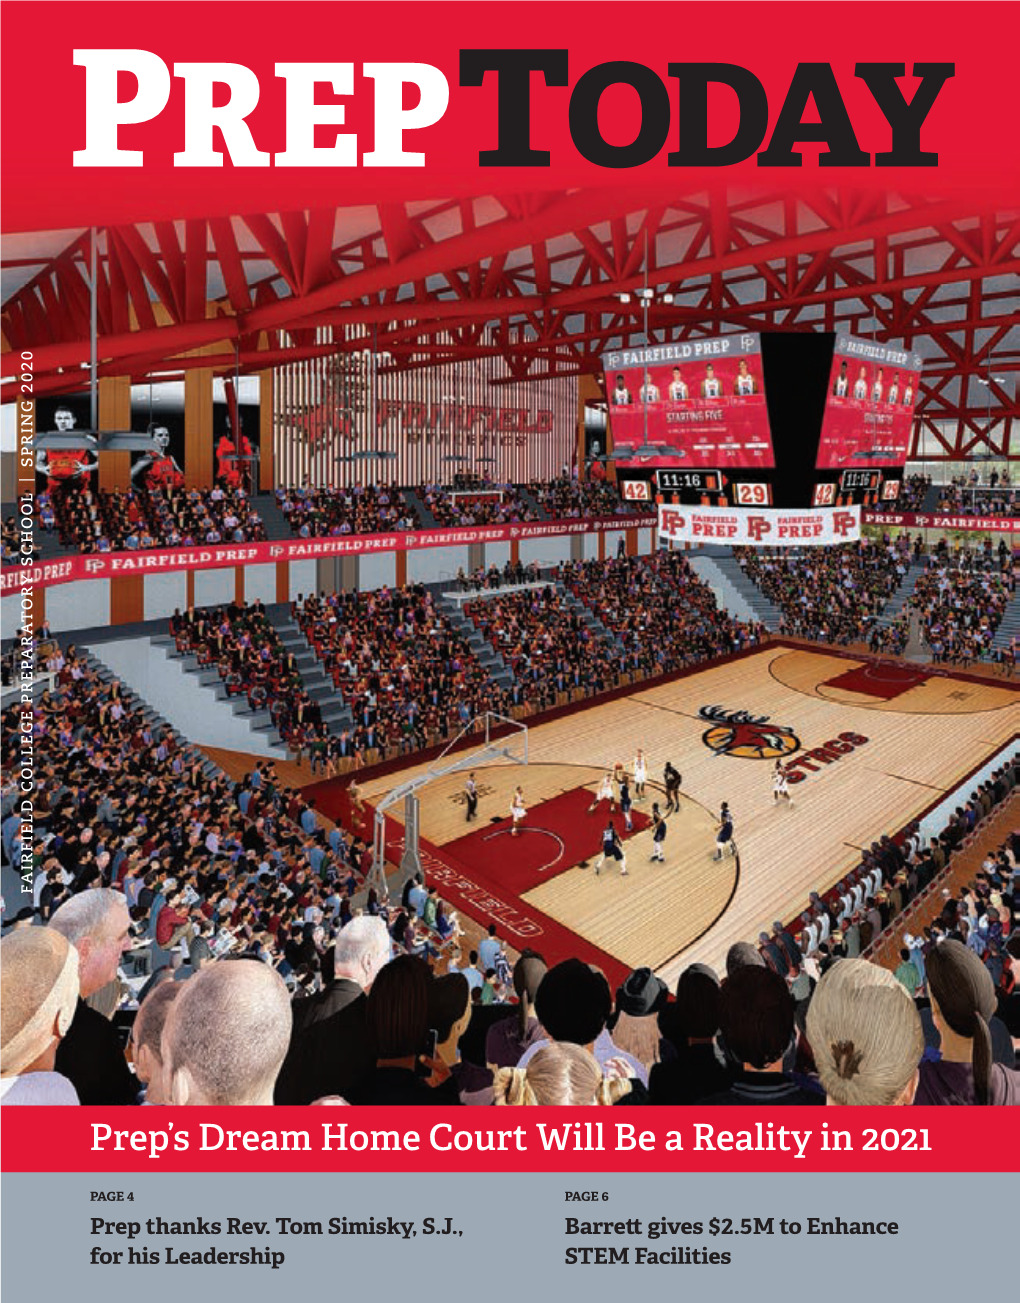 Prep's Dream Home Court Will Be a Reality in 2021